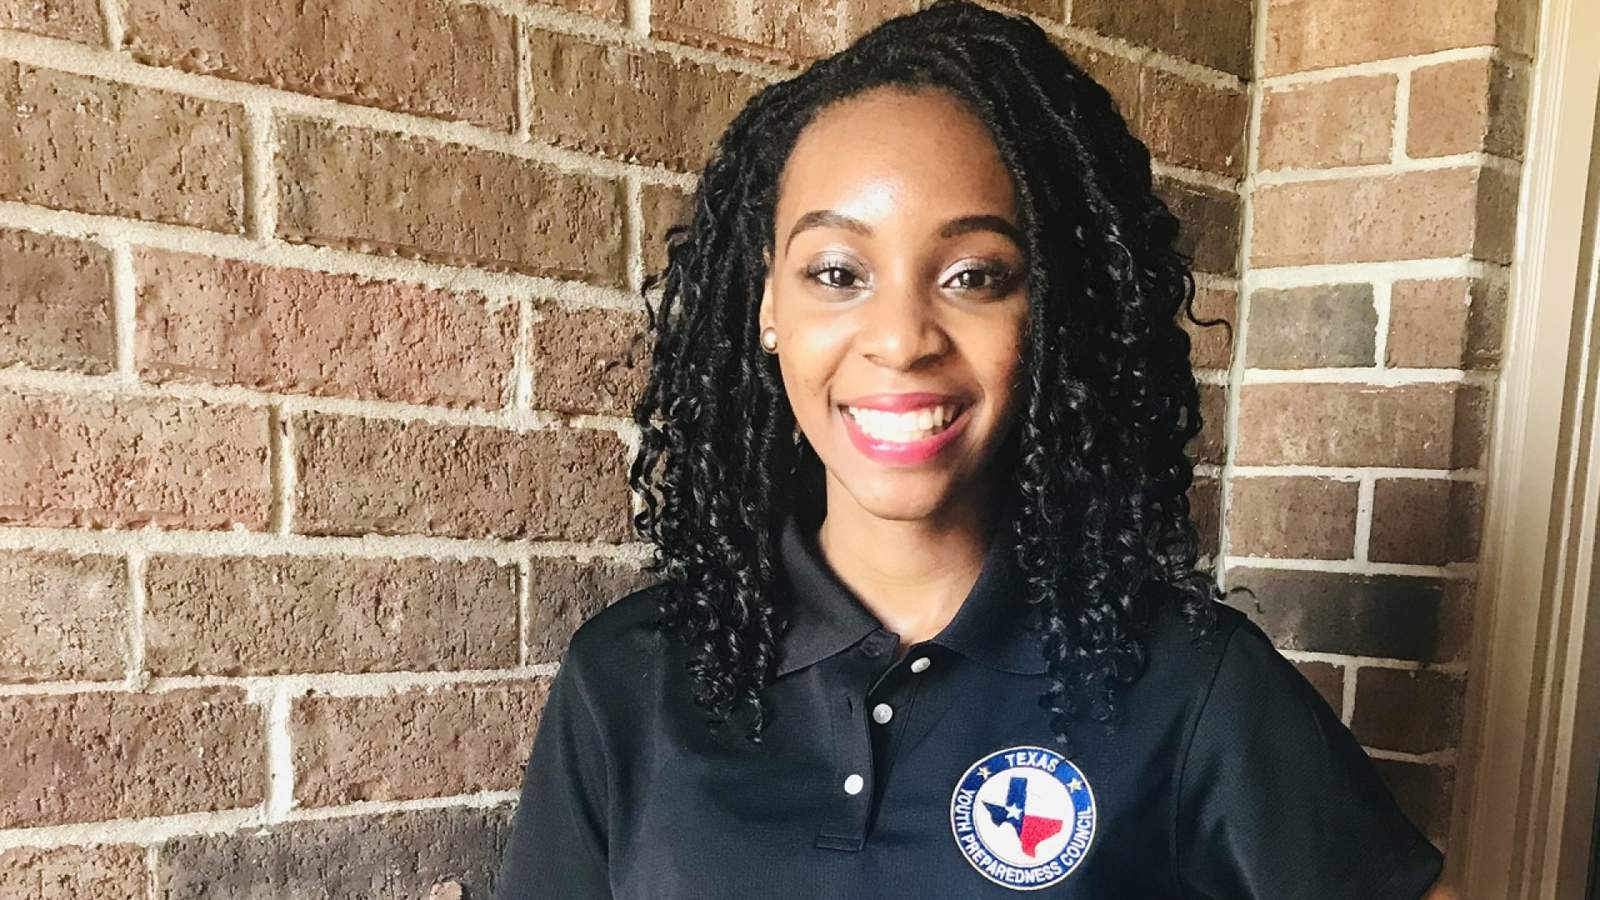 KPRC 2 Senior Scholarship: Meet Jaivyance Gillard the senior with a desire to explore the mind and how various elements can influence behavior